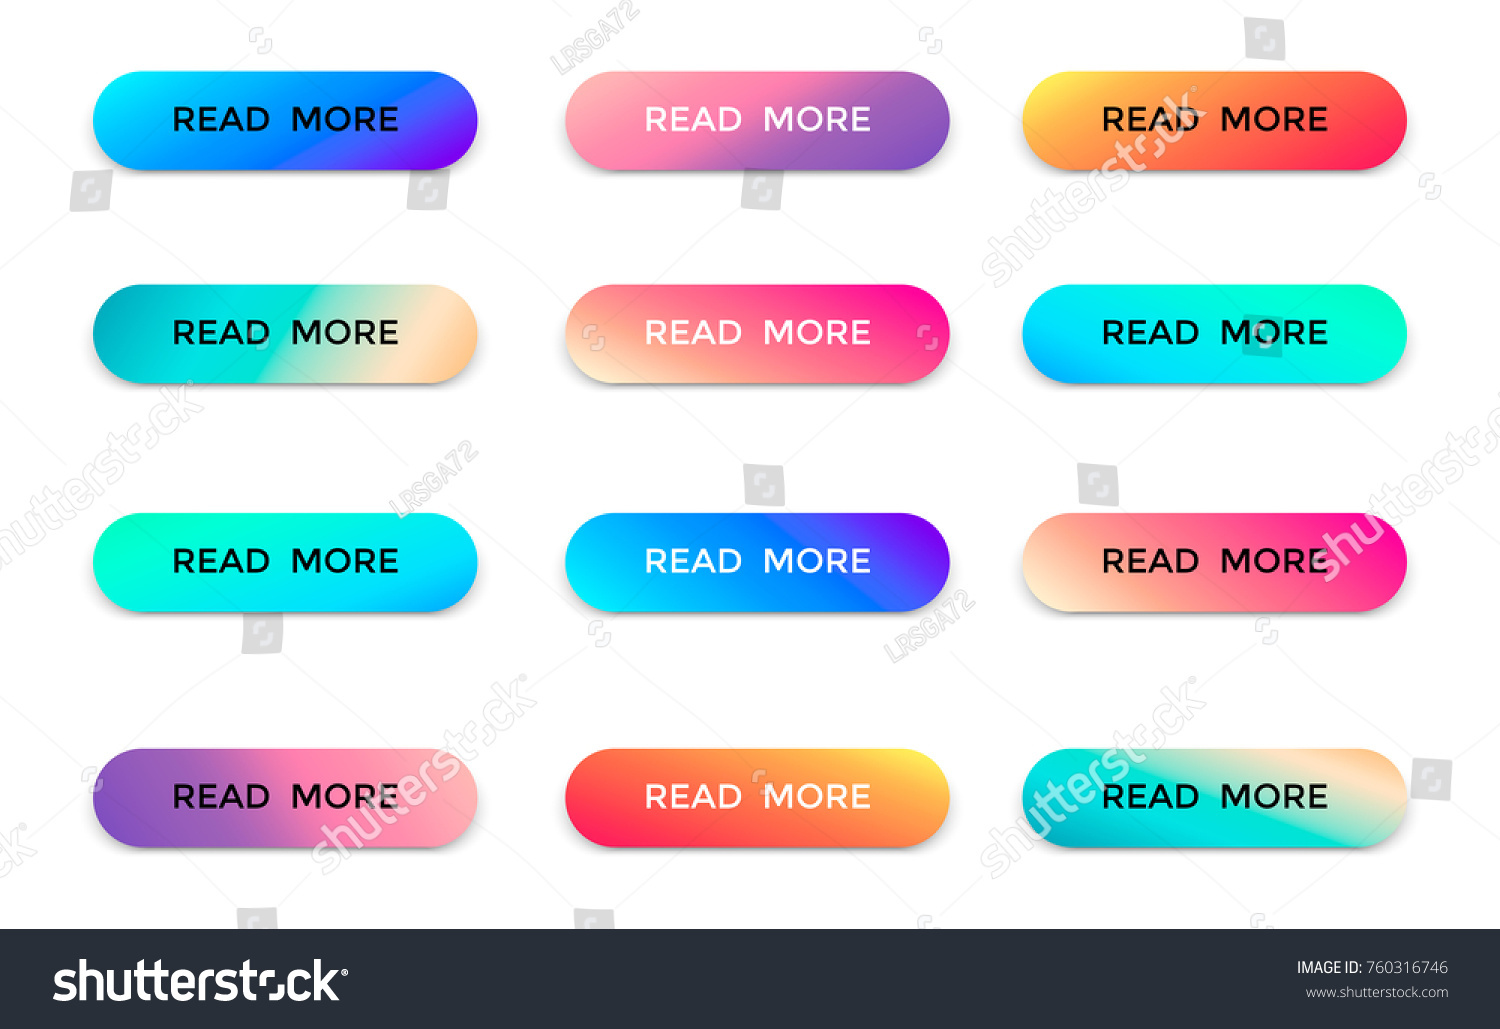 Modern read more color vector buttons isolated on white background. Read more arrow web button banner for website illustration. #760316746